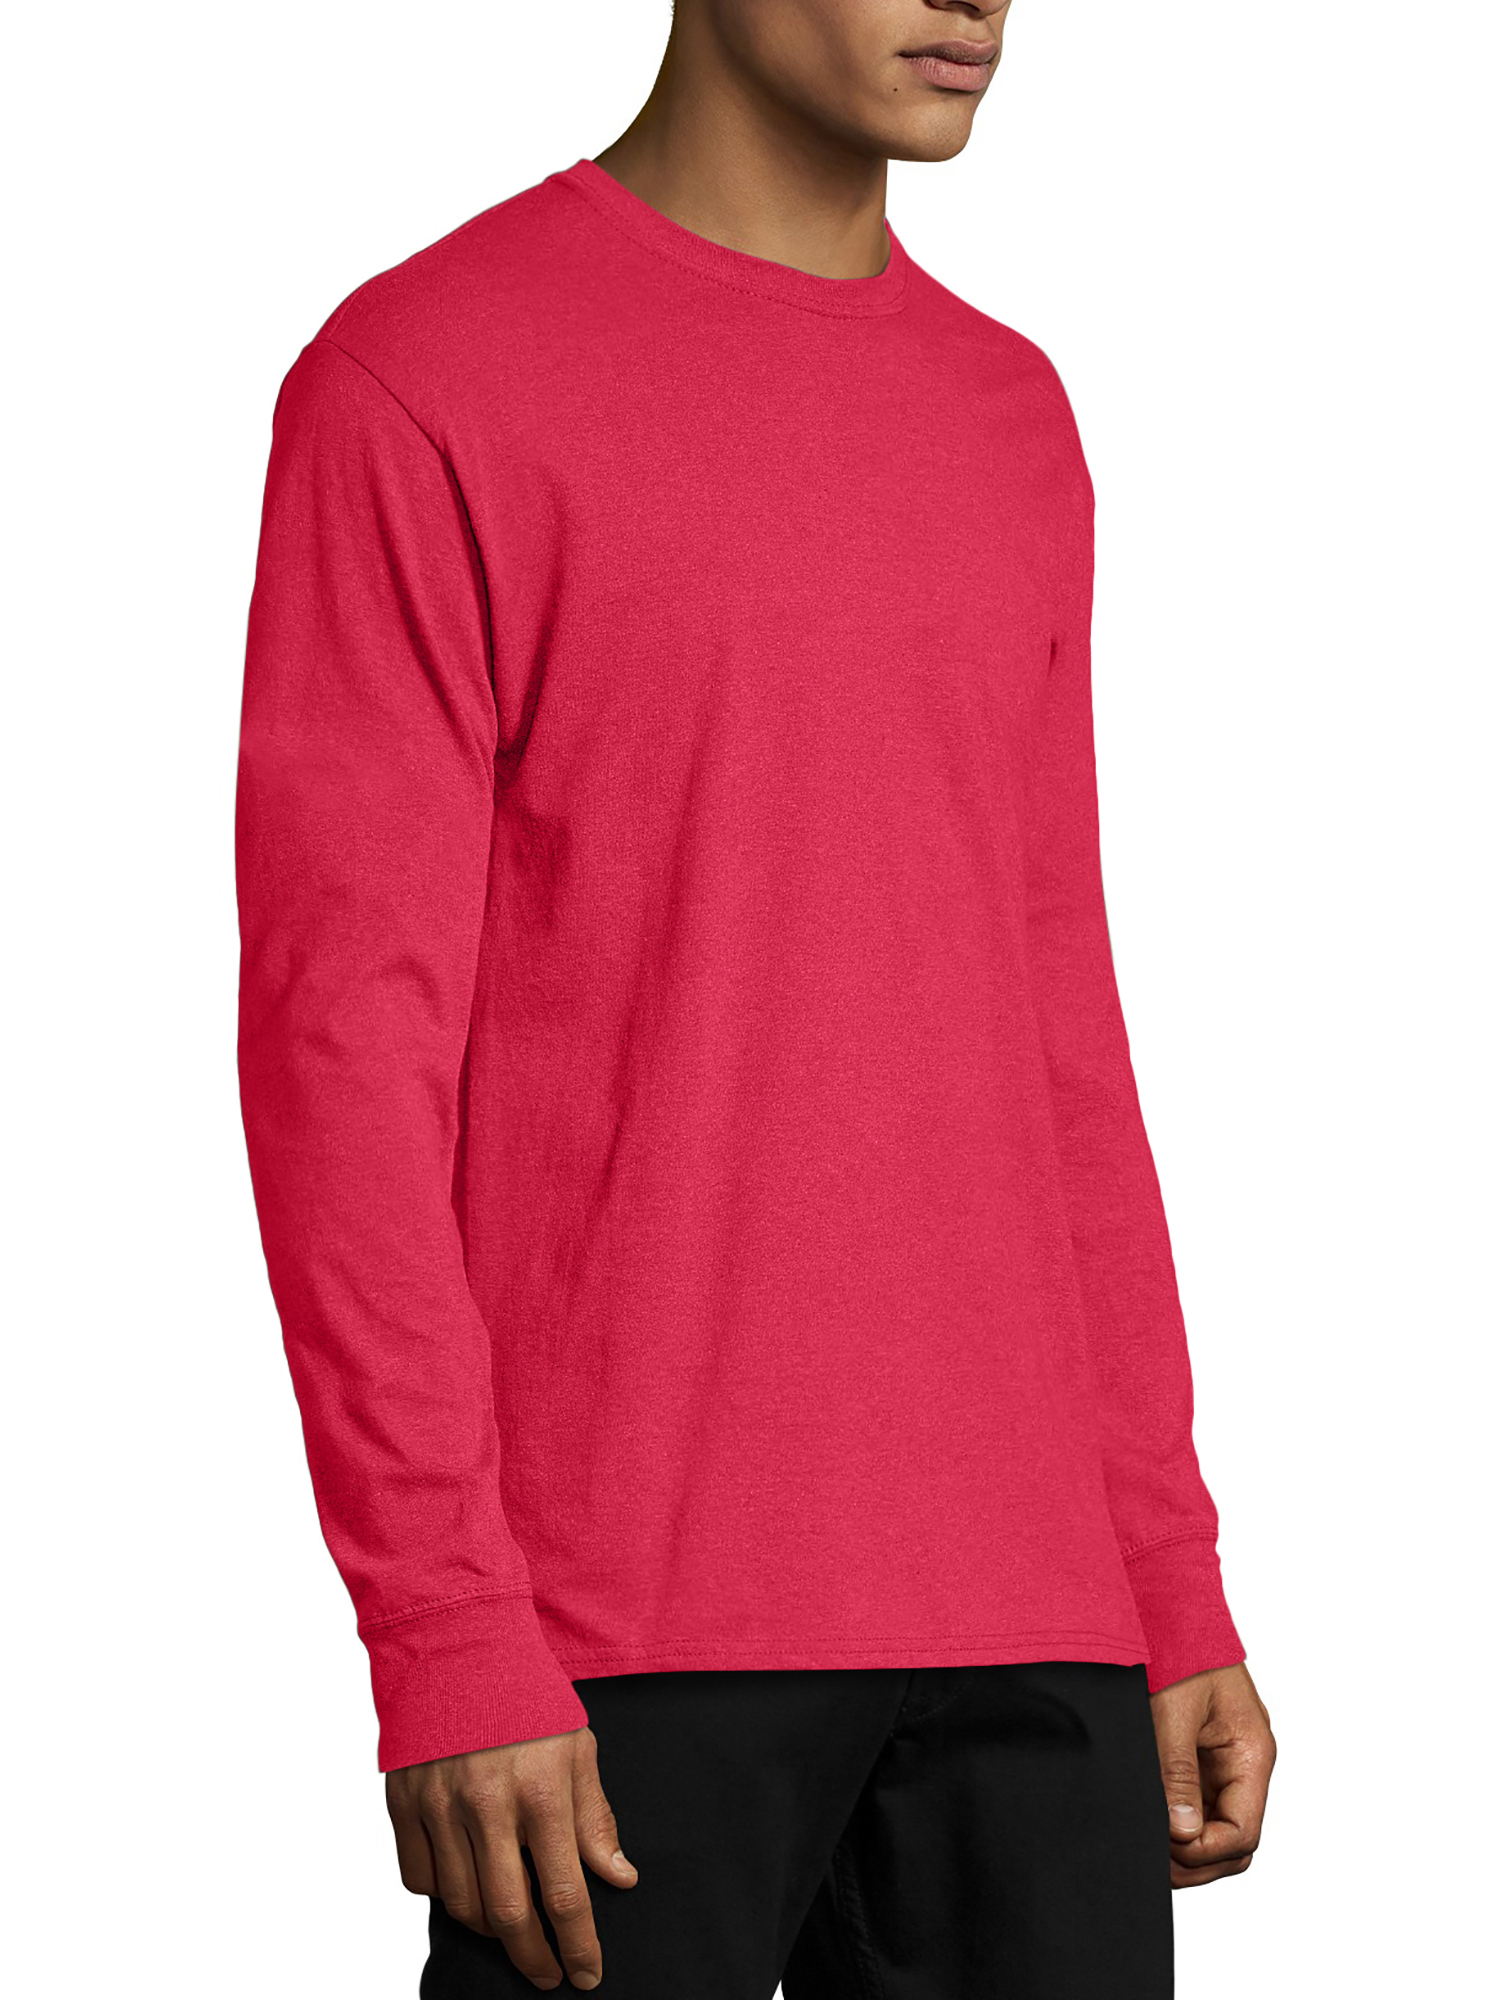 Hanes Men's and Big Men's X-Temp Lightweight Long Sleeve T-Shirt, Up To Size 3XL - image 5 of 5